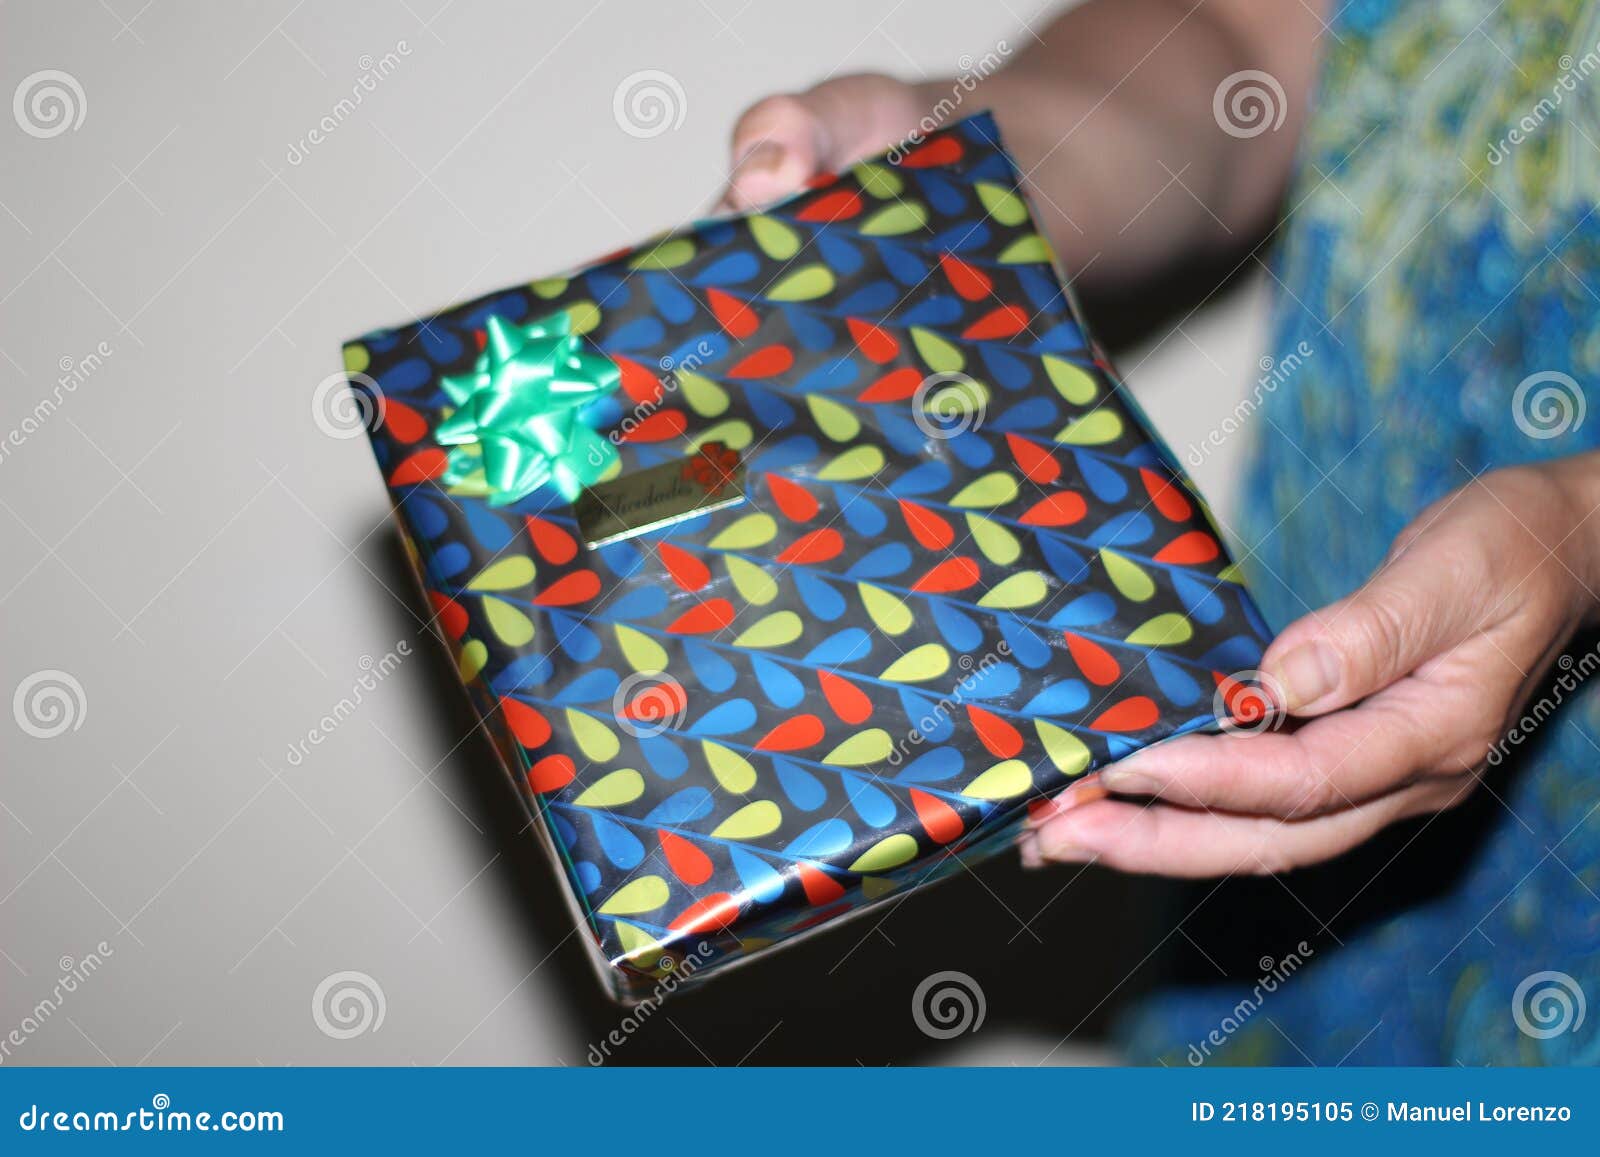 beautiful photo of a gift wrapped in beautiful paper